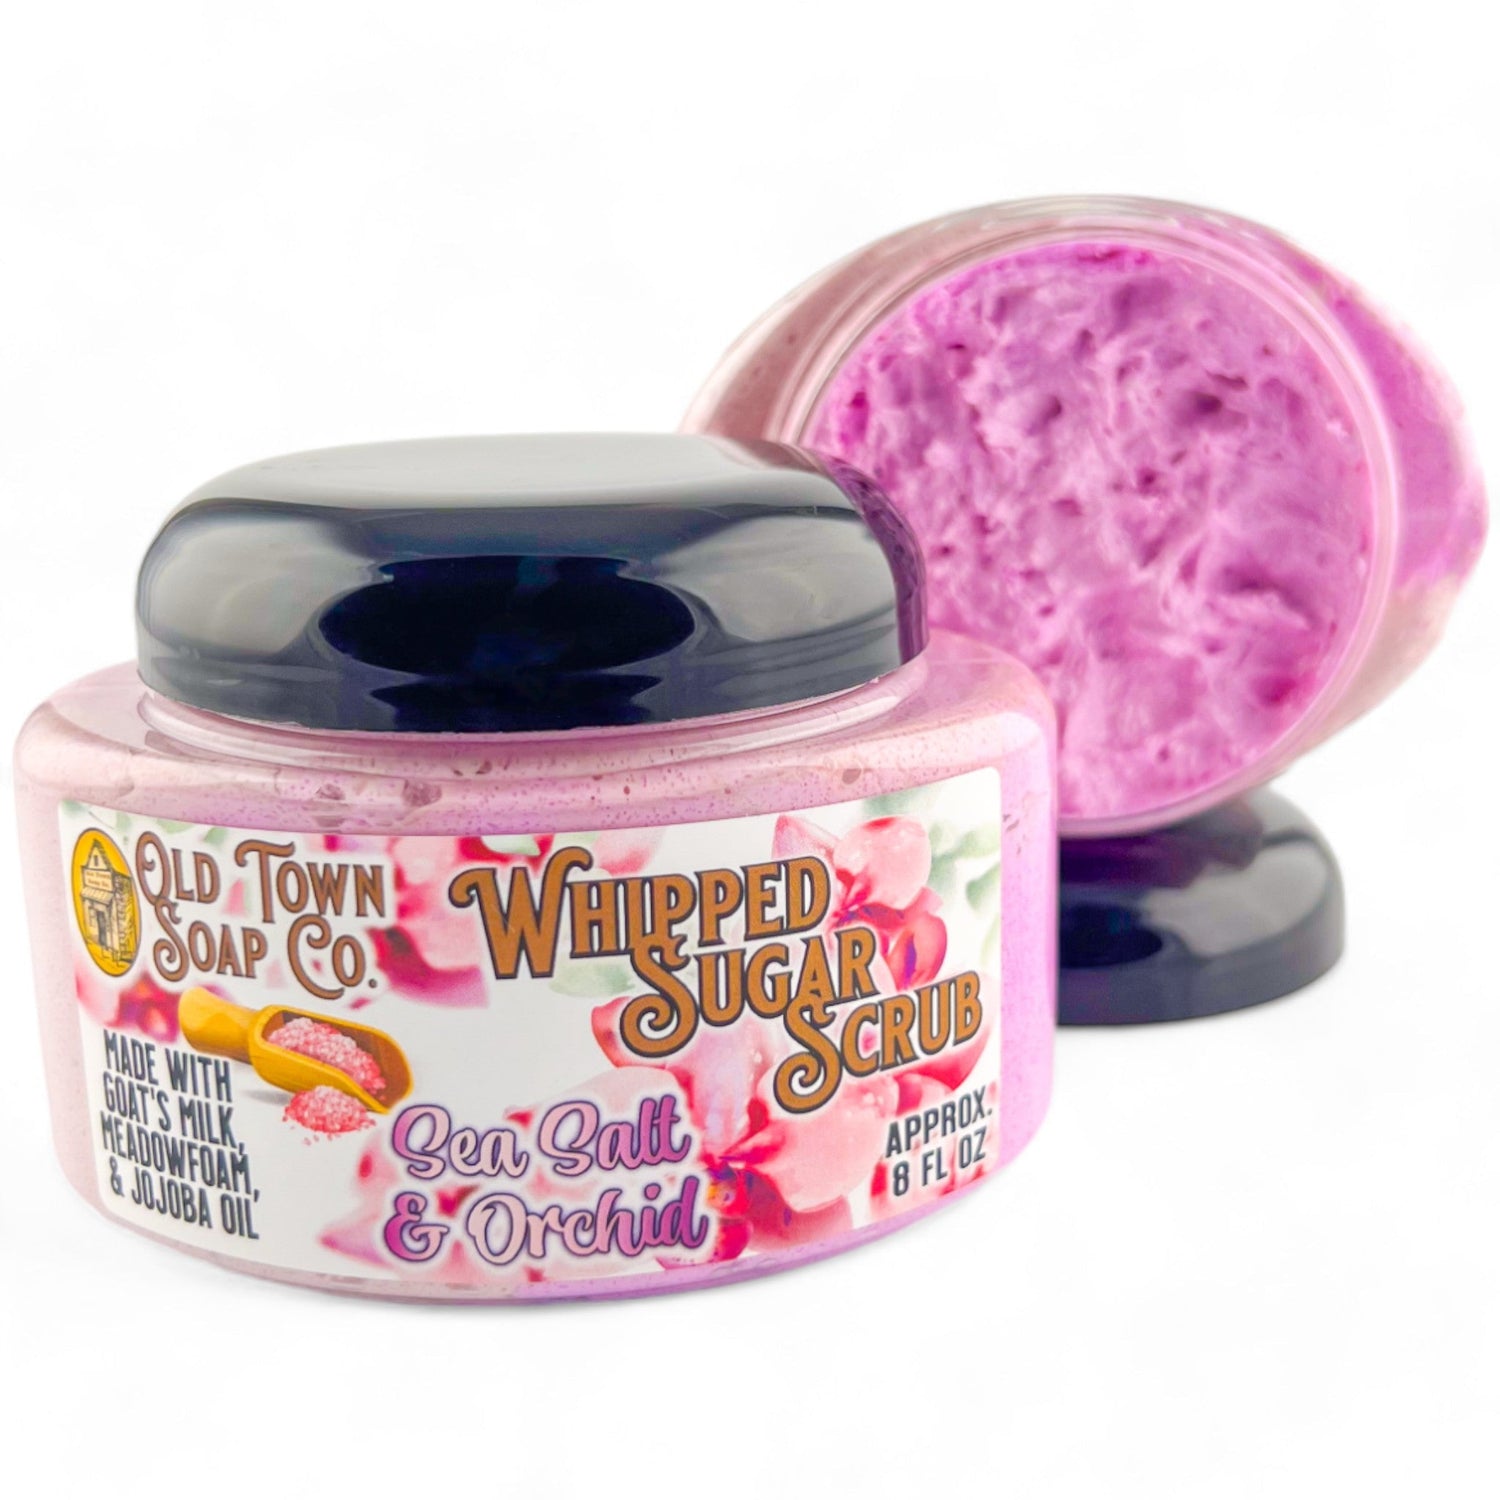 Sea Salt &amp; Orchid -Whipped Sugar Scrub Soap - Old Town Soap Co.